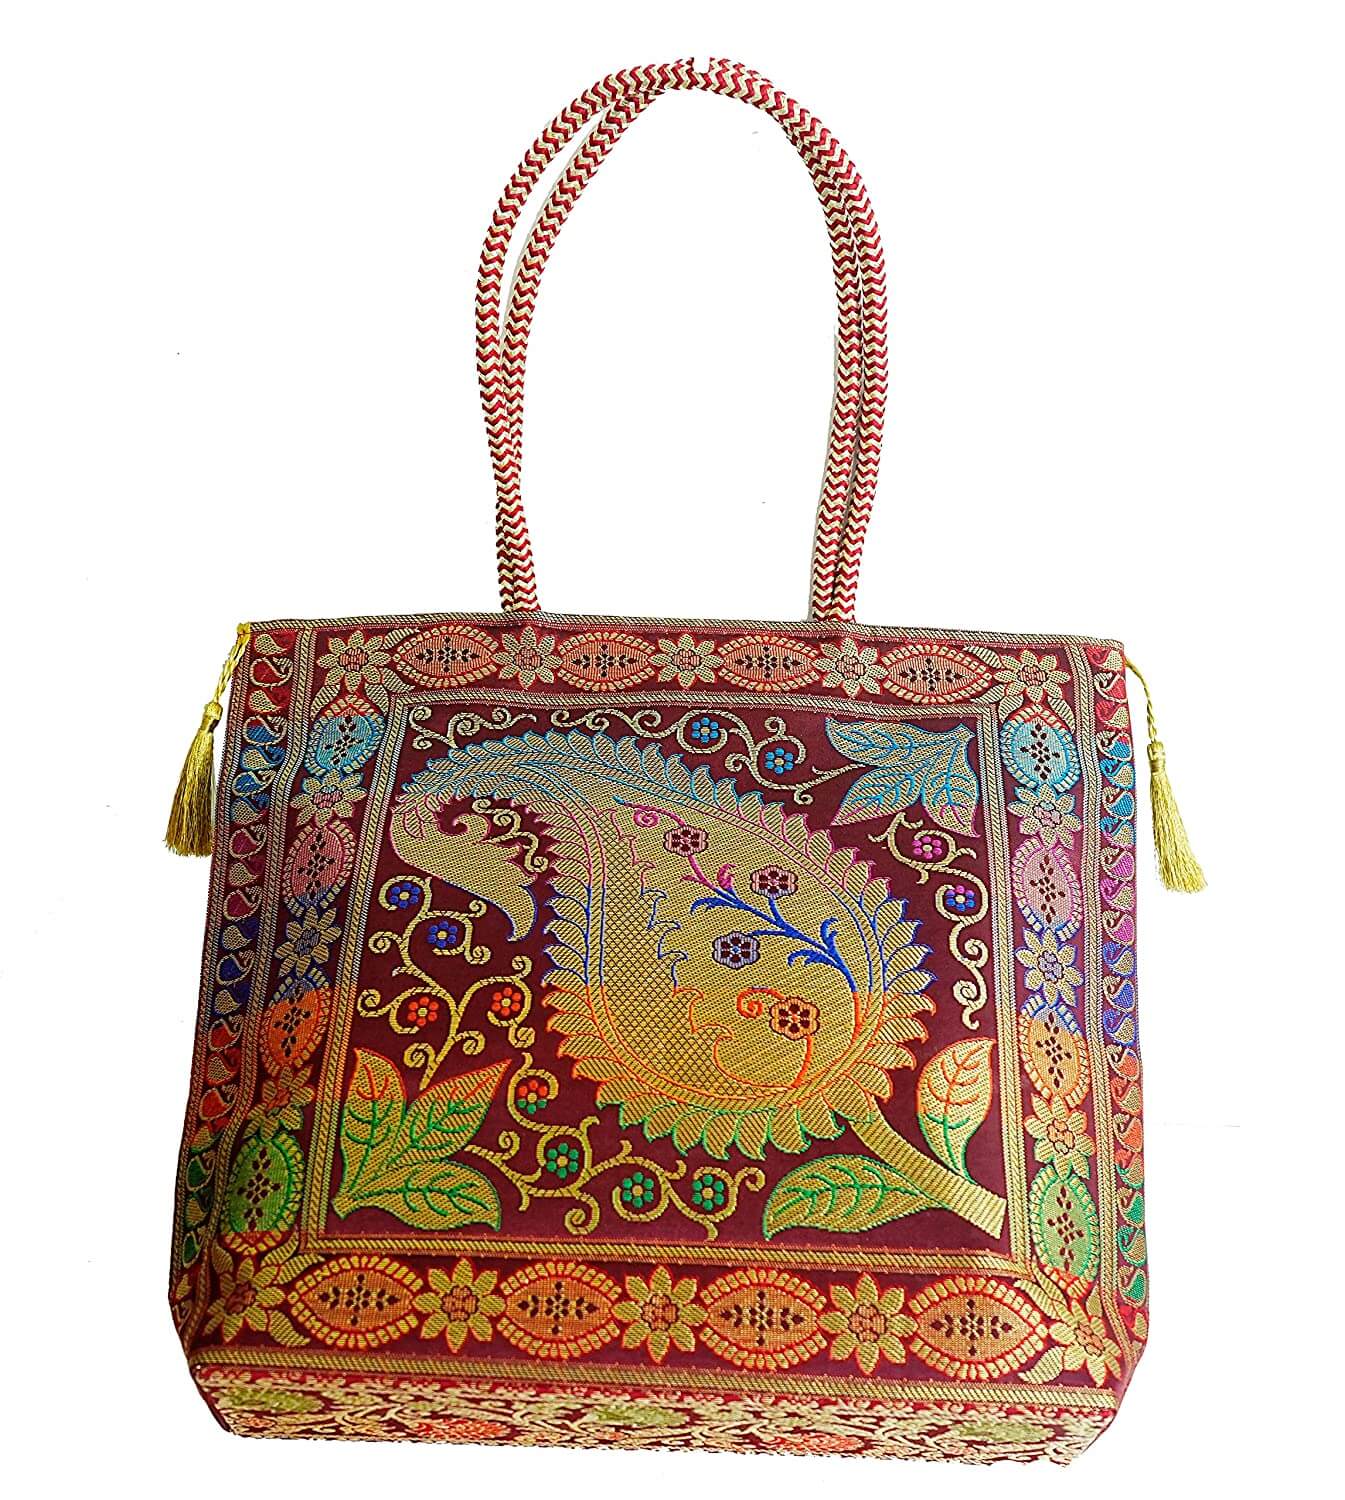 Embroidery Silk Handicraft Hand Bag, Shoulder, Tote Bag For Ladies (13 x 11.5 x 7.5 Inches, Leaves & Flower, Maroon Color) Mangal Fashions | Indian Home Decor and Craft